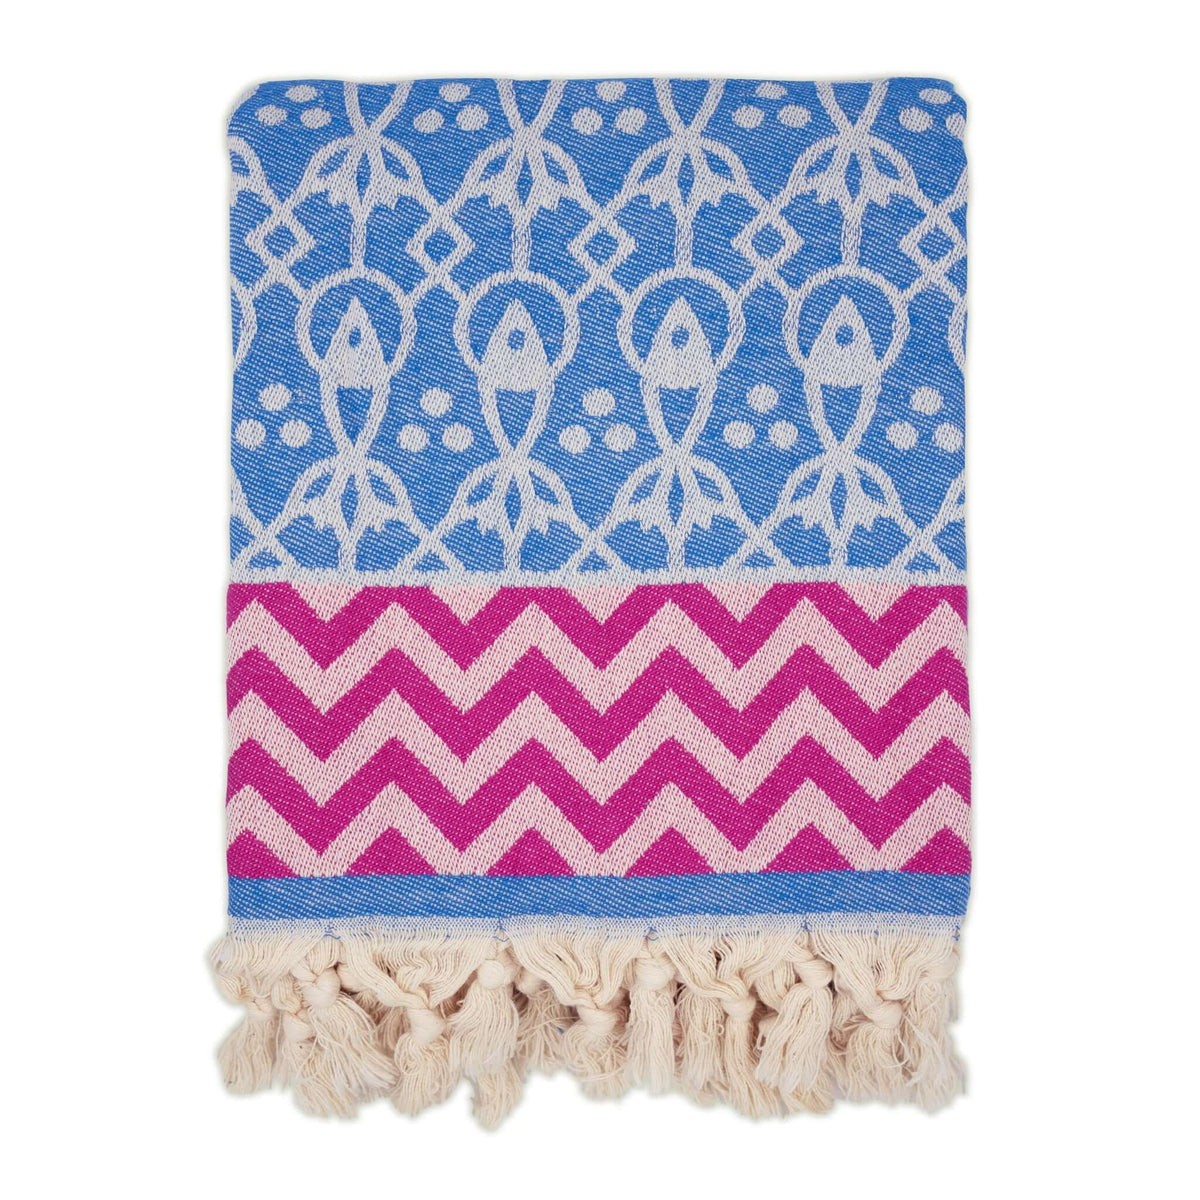 turkish towel blue fish and pink zigzag pattern with tassels knots vibrant colours fun design designer fashinable